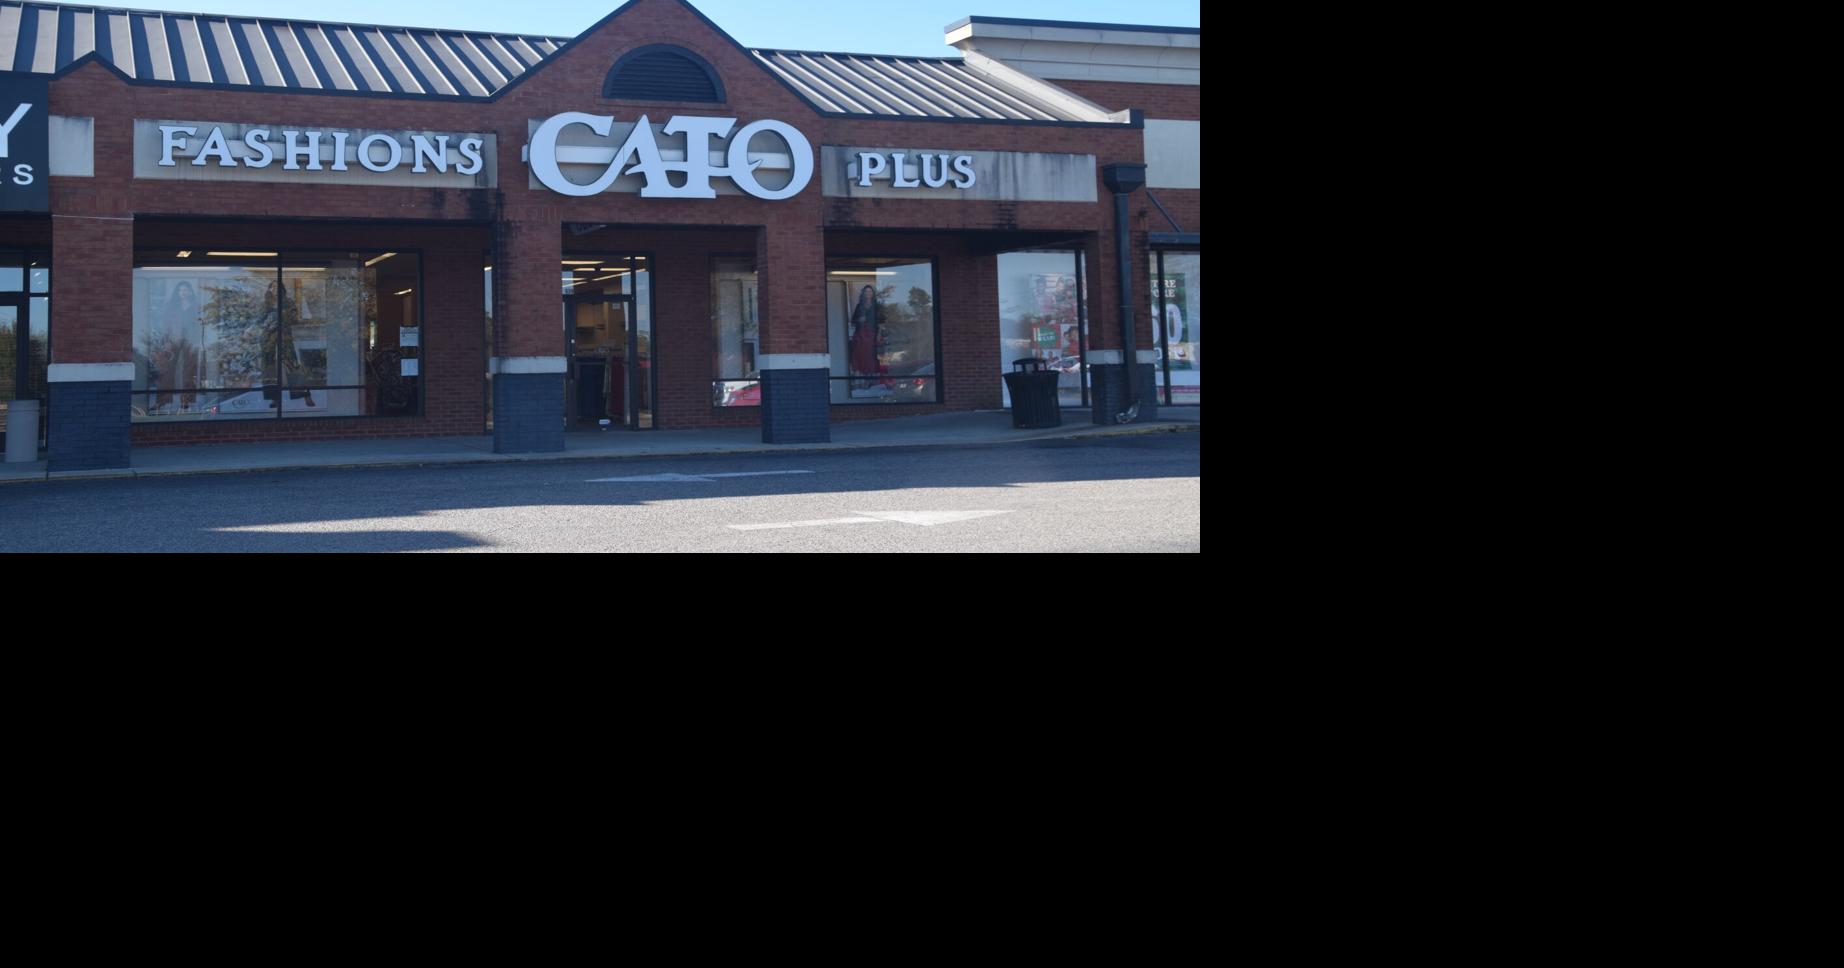 Cato Fashions' September same-store sales up 5 percent